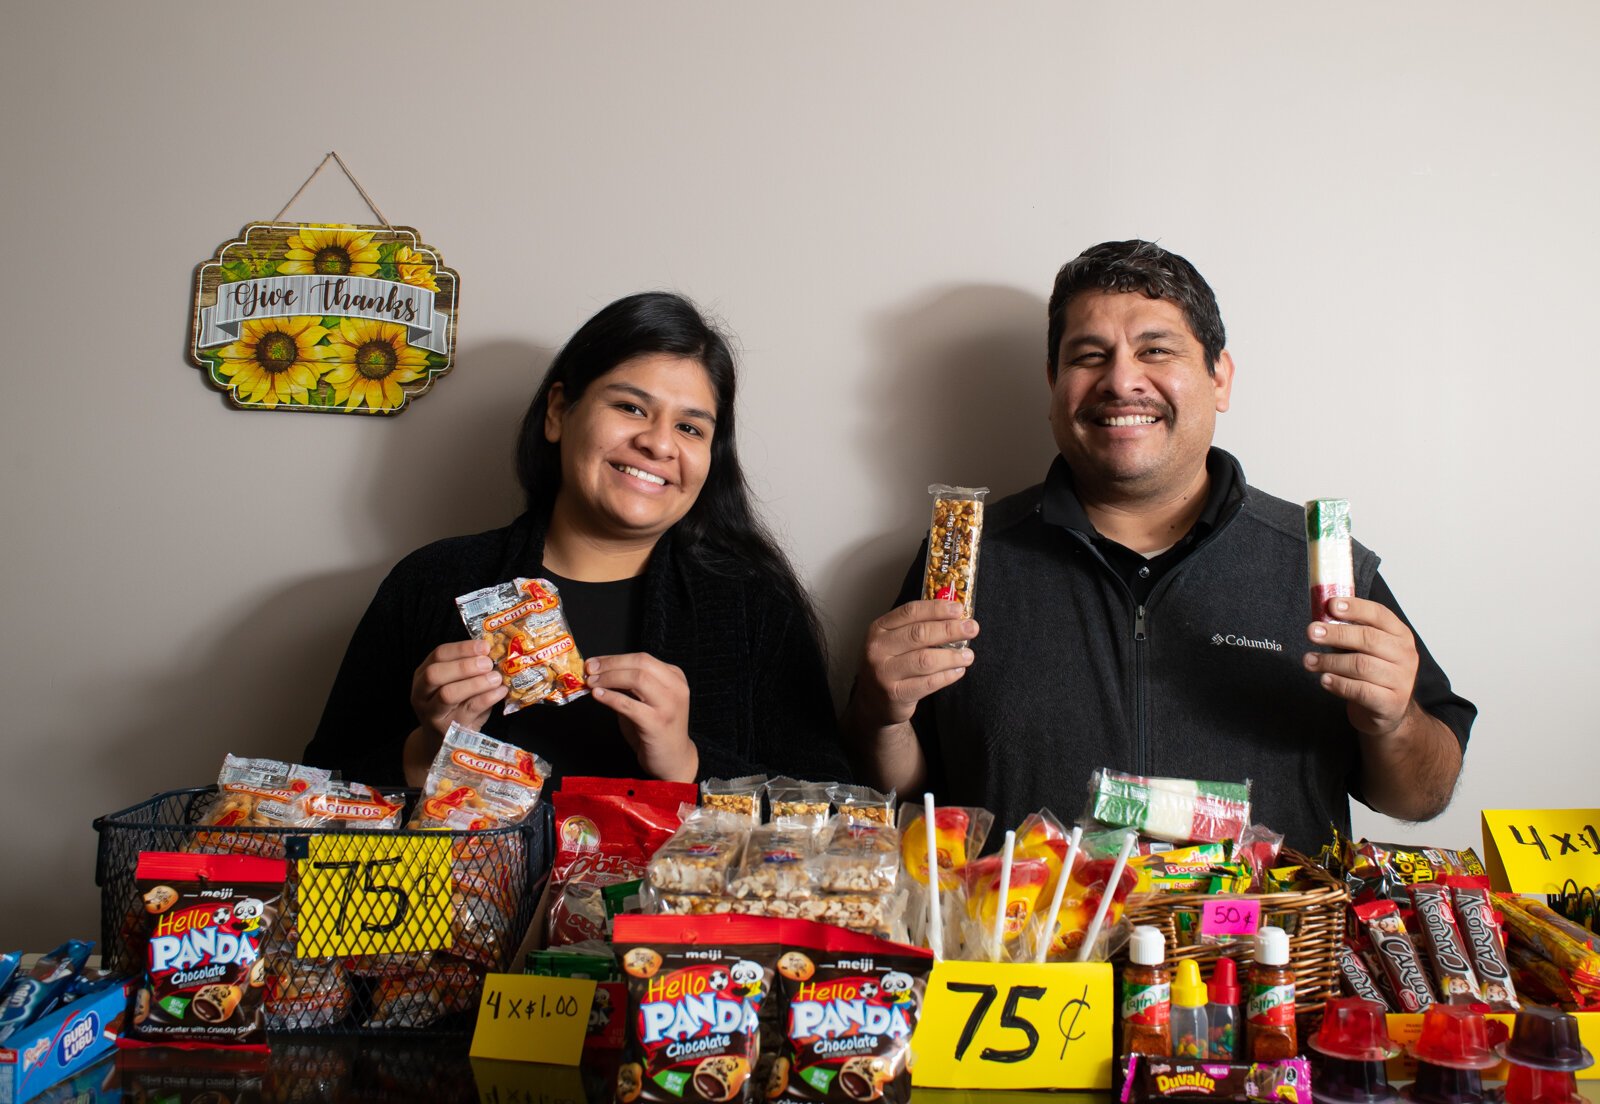 Judith Peña and her father Carlos Peña own the Zion market at 2312 S. Calhoun St., which sells spices, tortillas, beverages and other traditional foods from Mexico. 